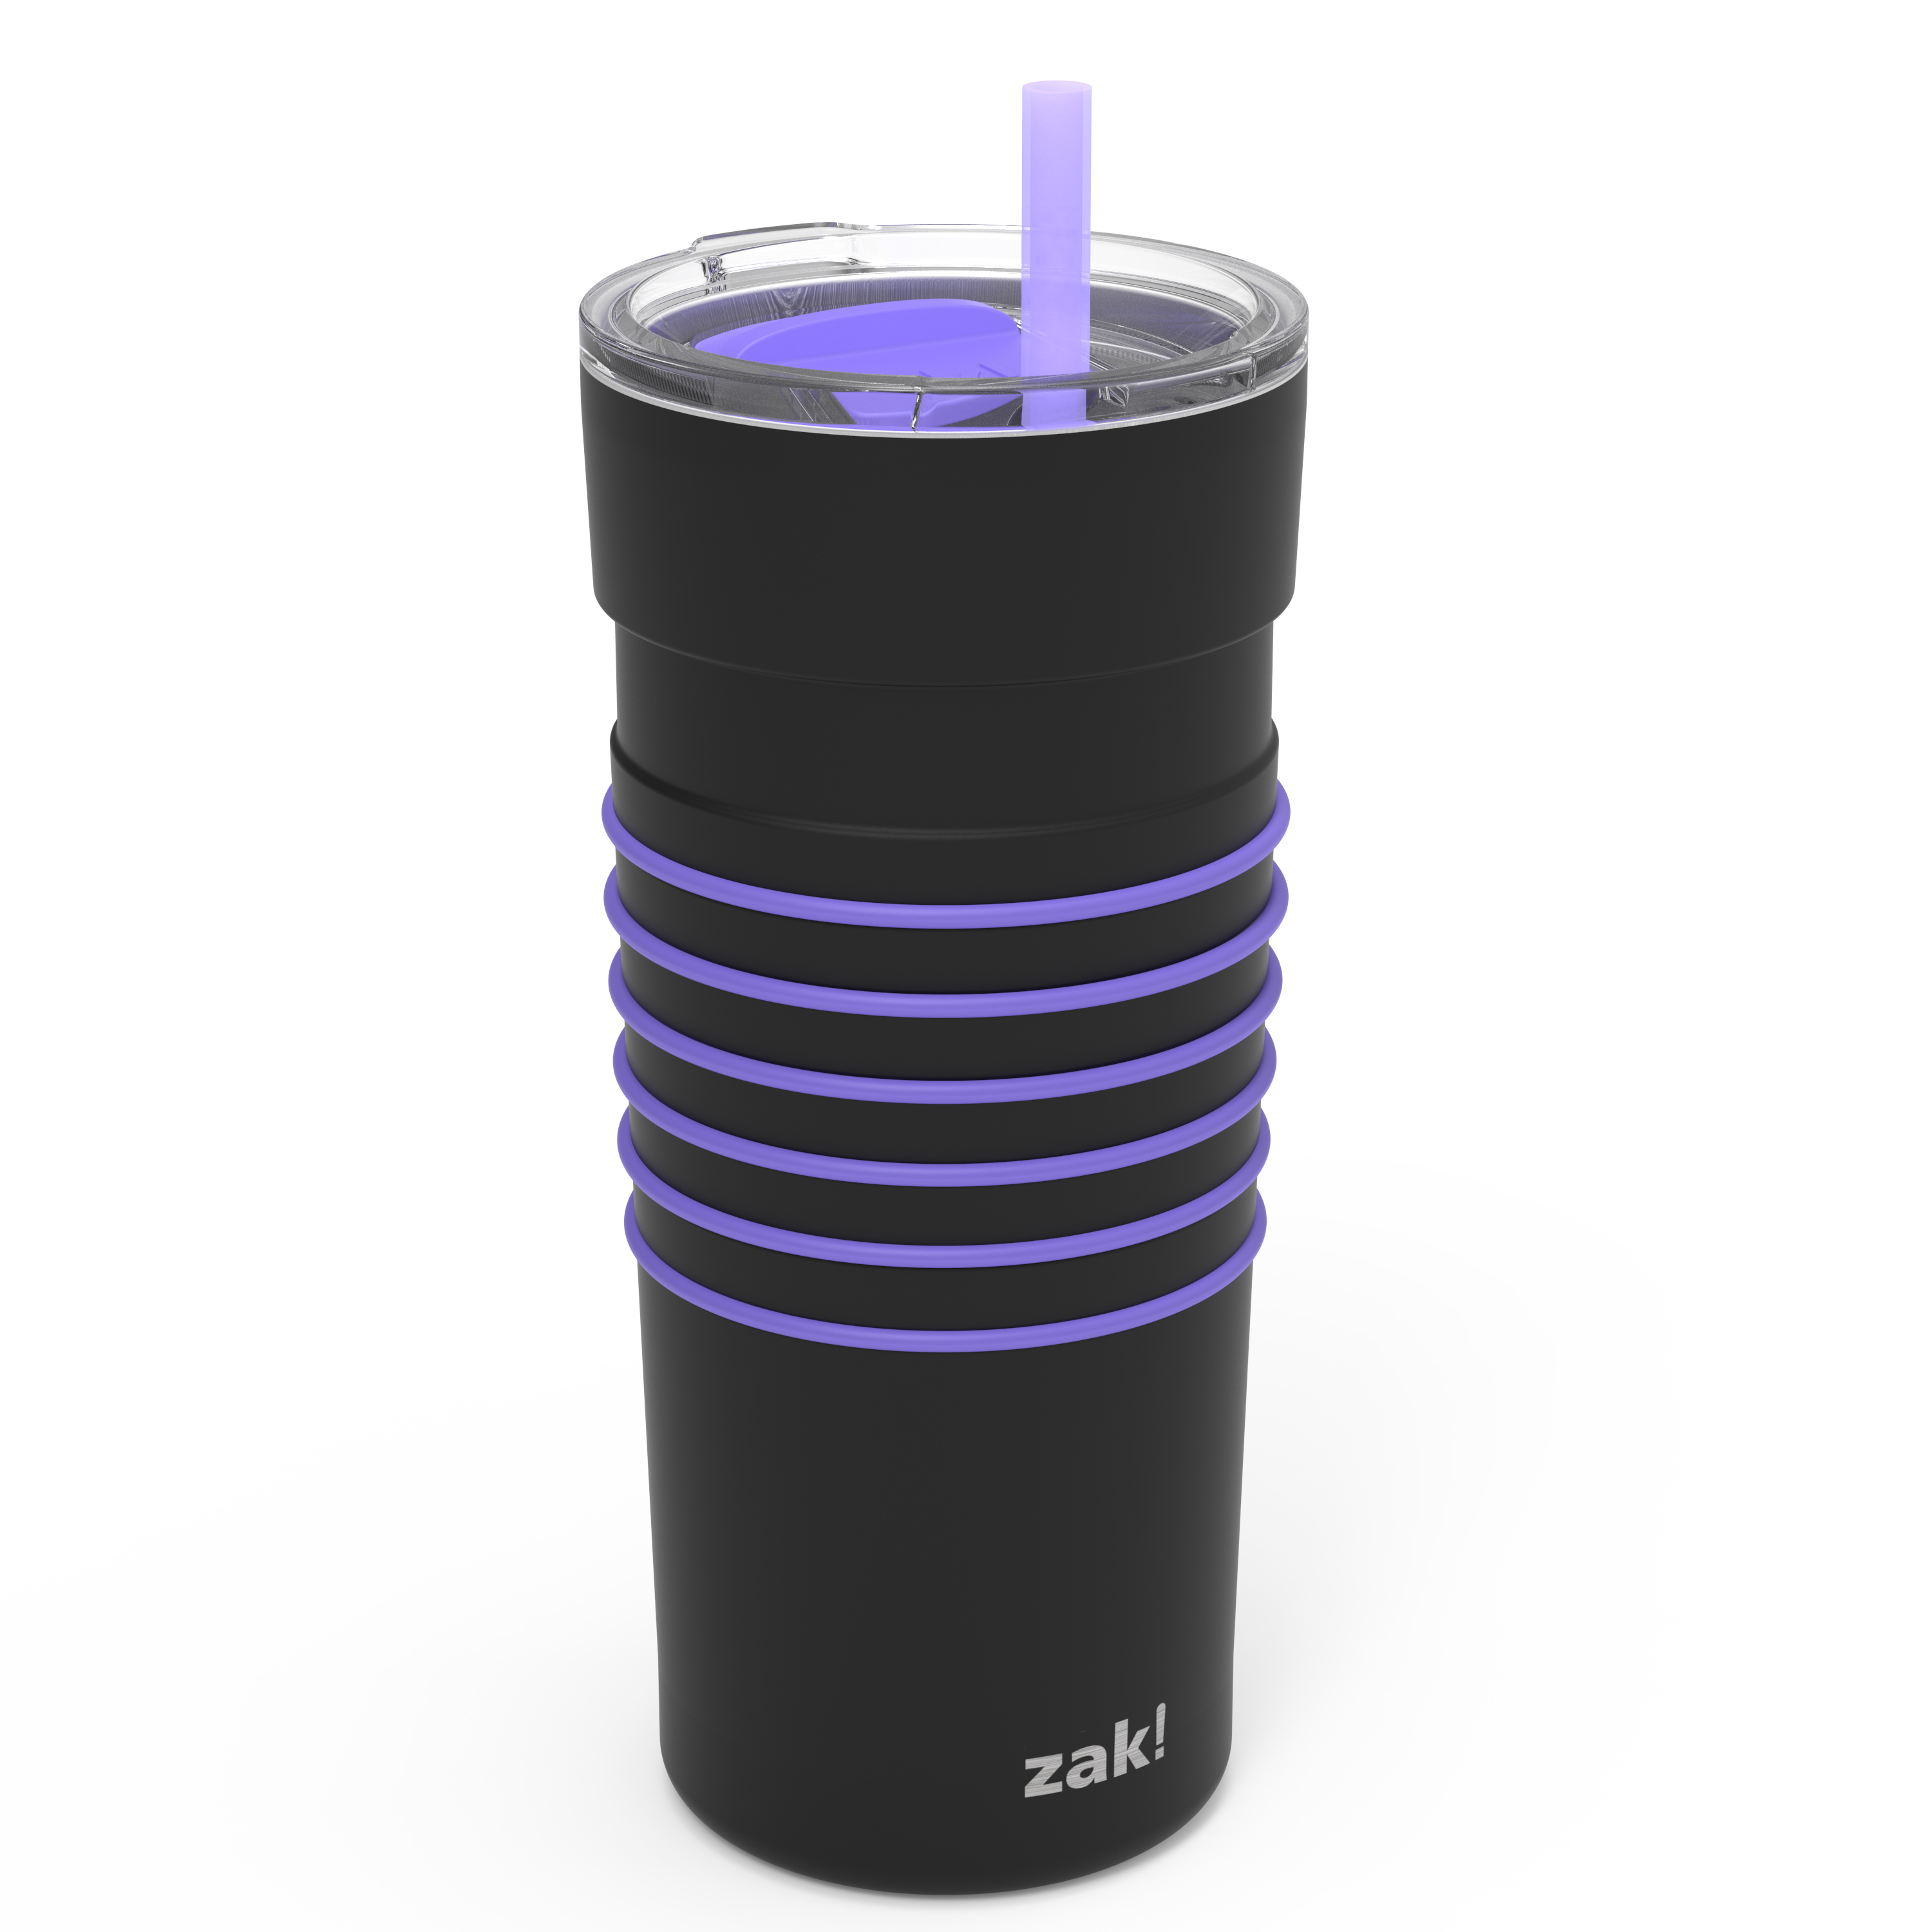 HydraTrak 20 ounce Vacuum Insulated Stainless Steel Tumbler, Black with Purple Rings slideshow image 1